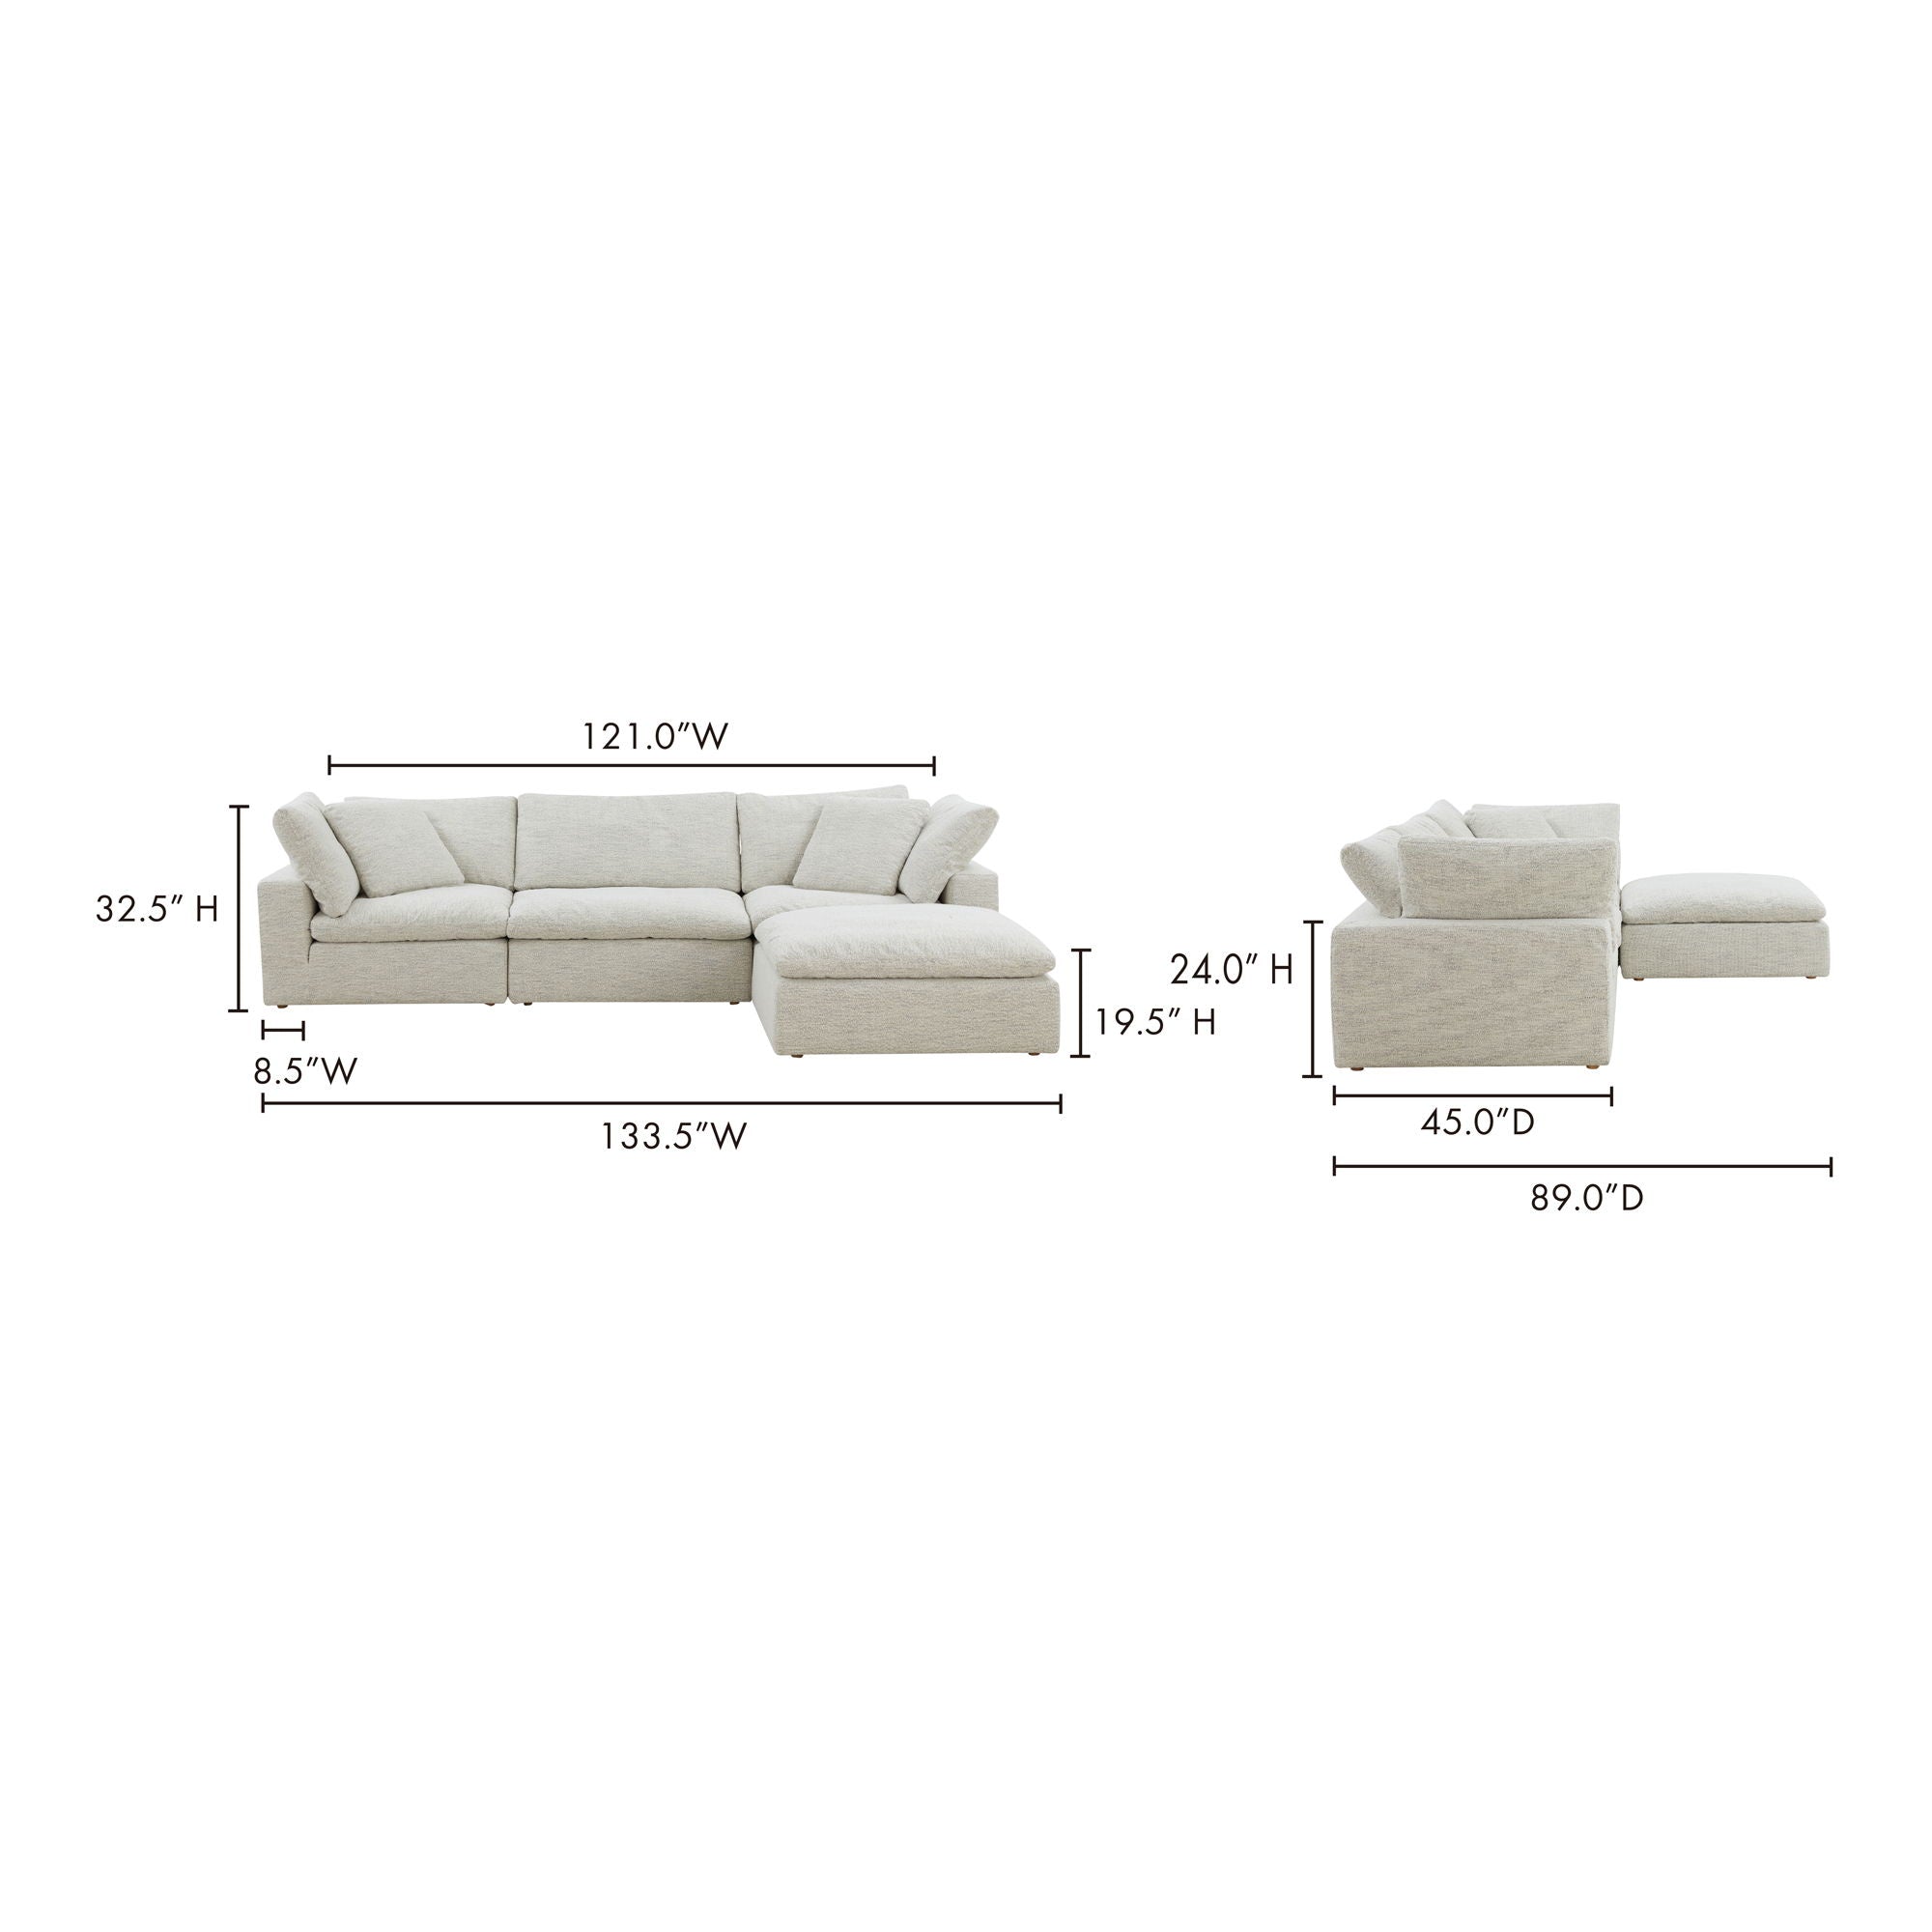 Coastside Sand Modular Sectional - Comfy, Stain-Resistant-Stationary Sectionals-American Furniture Outlet